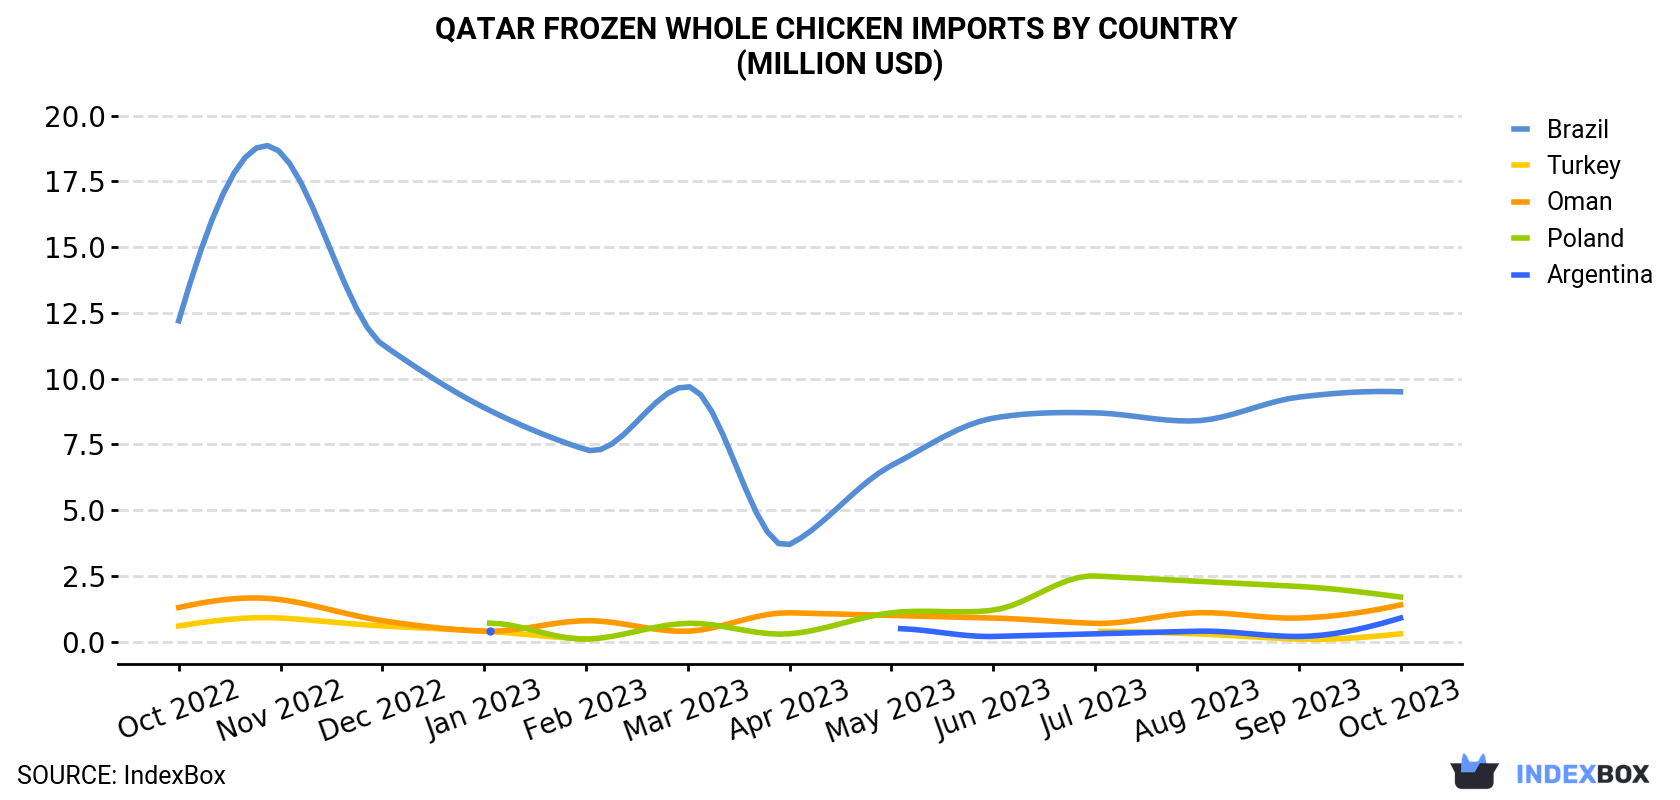 Qatar Frozen Whole Chicken Imports By Country (Million USD)